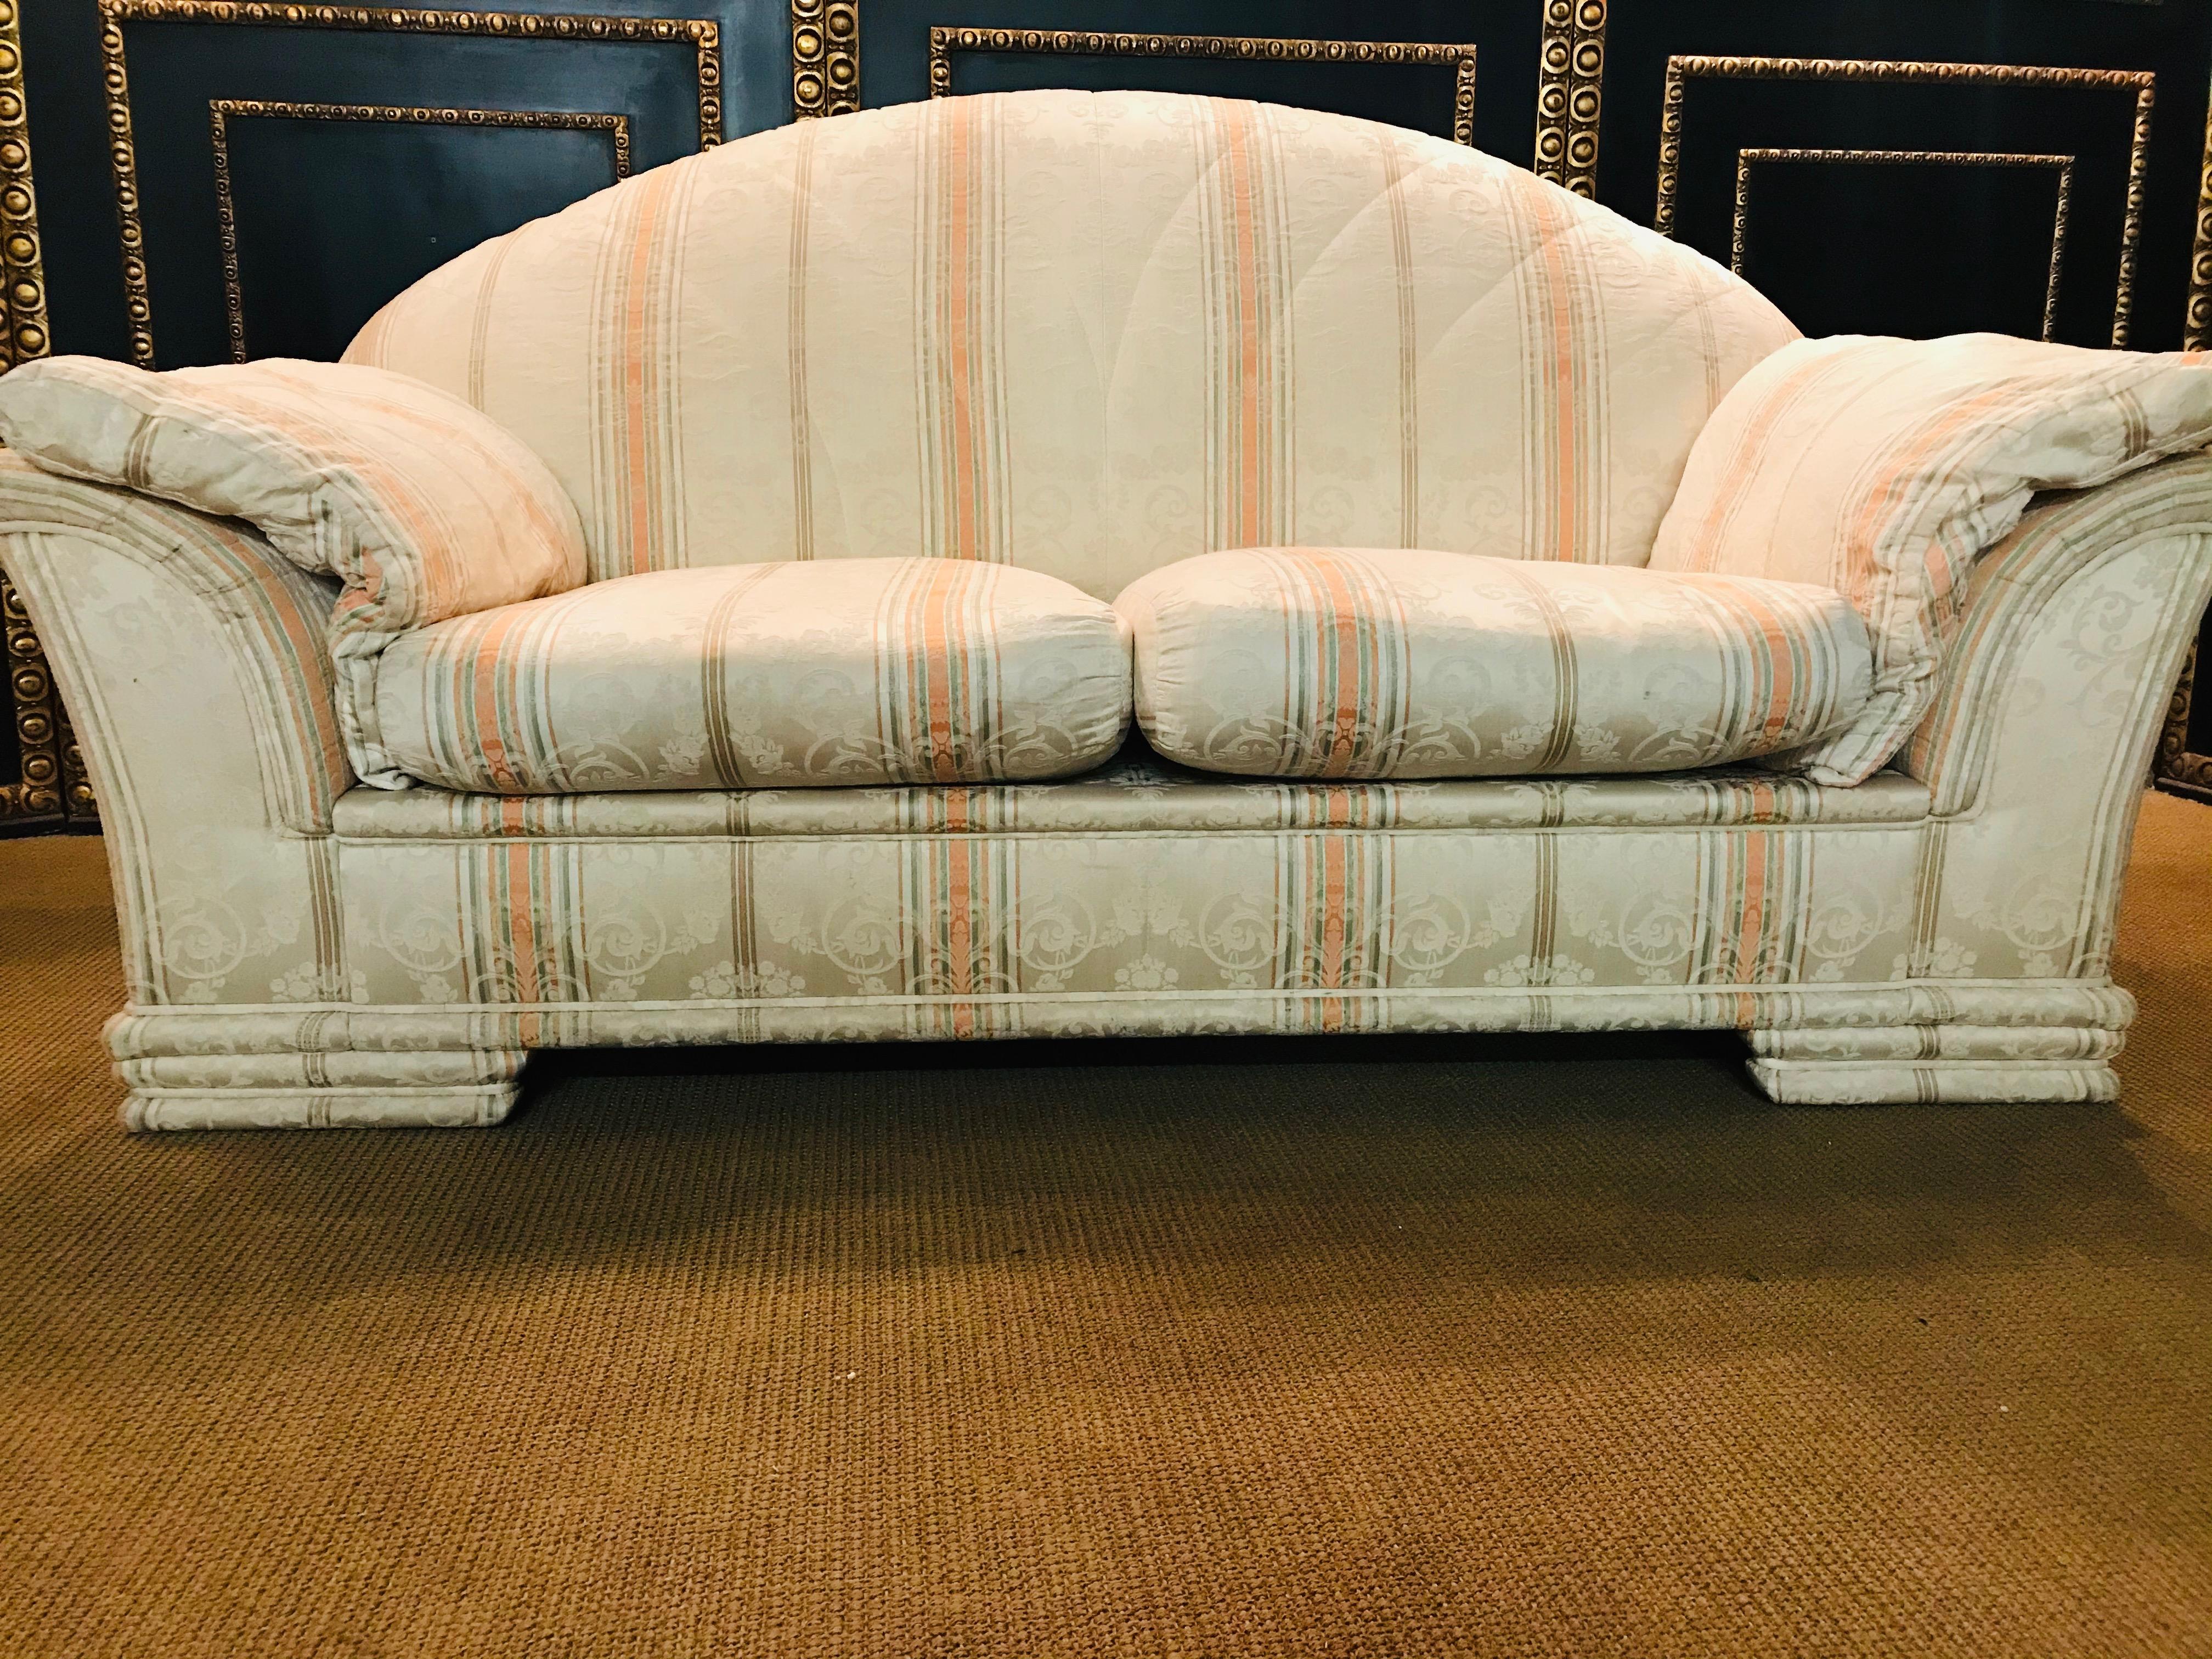 Very High-Quality Couch Set from the Bielefeld Workshops with Baroque Patterns 9